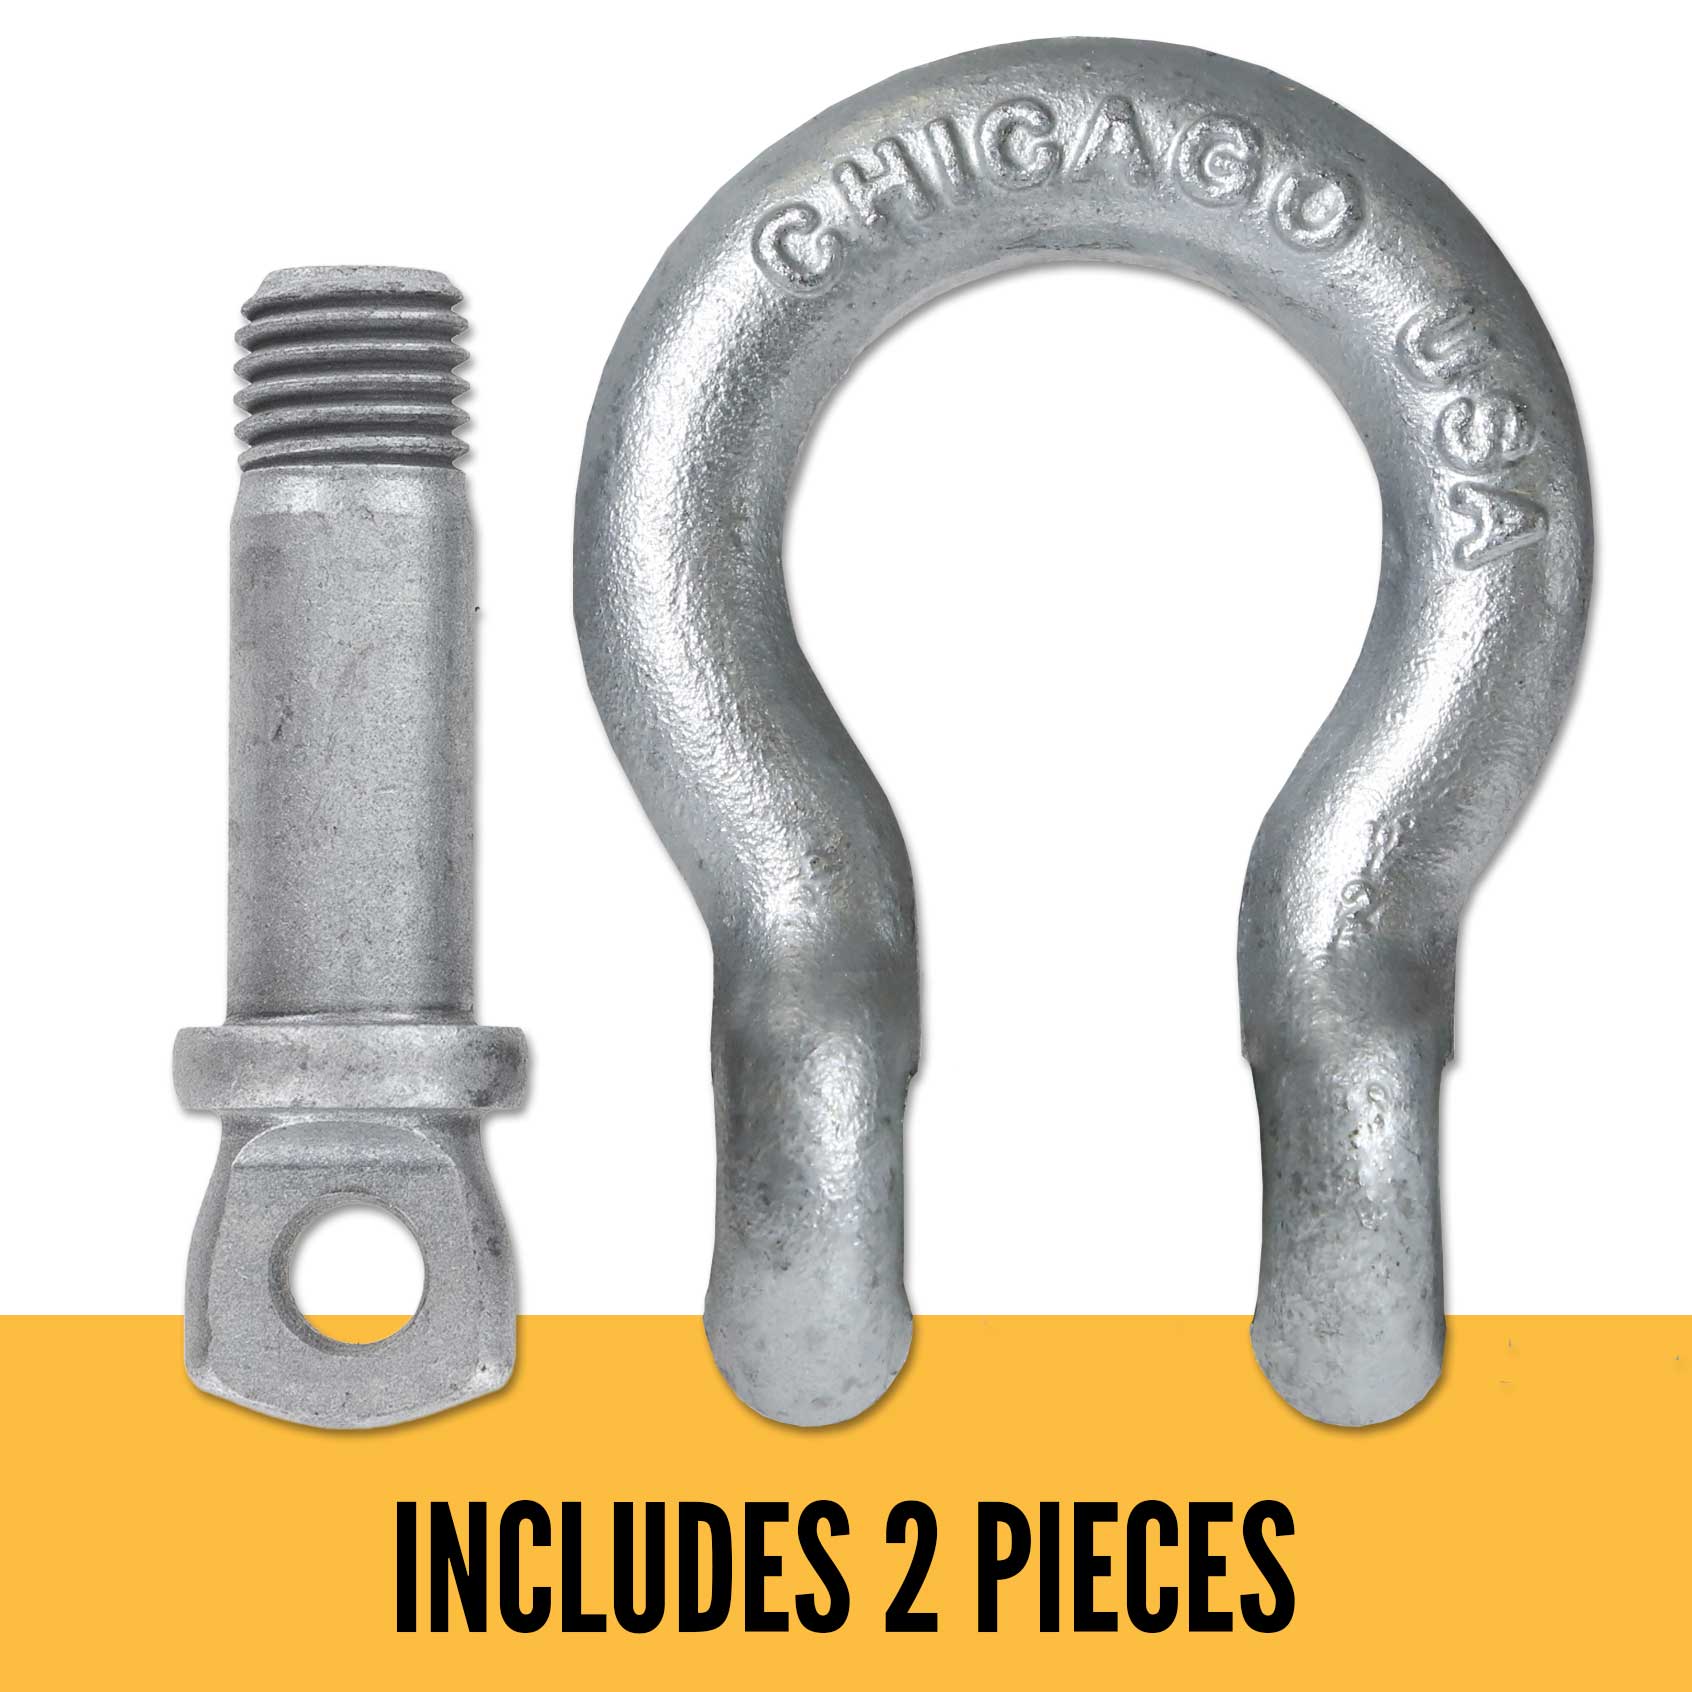 Screw Pin Anchor Shackle - Chicago Hardware - 1-1/8" Galvanized Steel - 9.5 Ton parts of a shackle